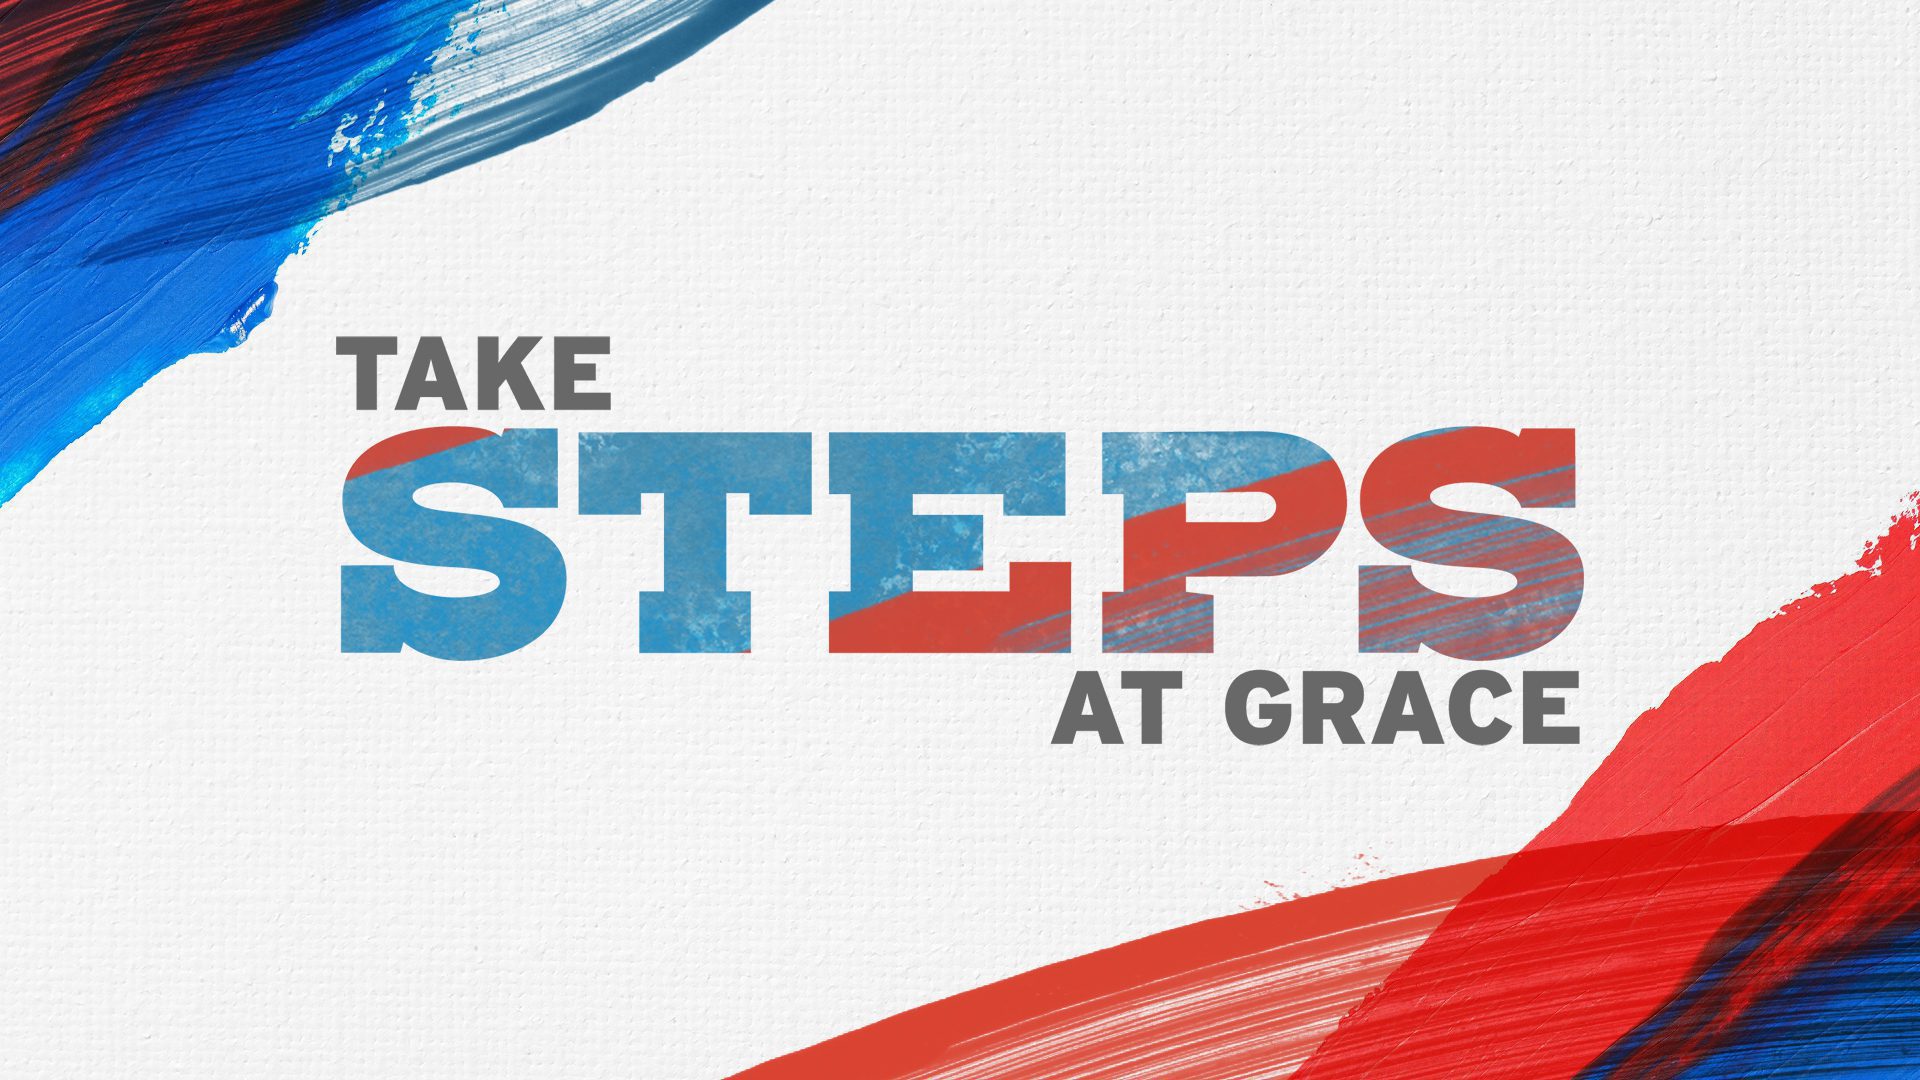 Take steps at grace - blue and red pain marking the corners.